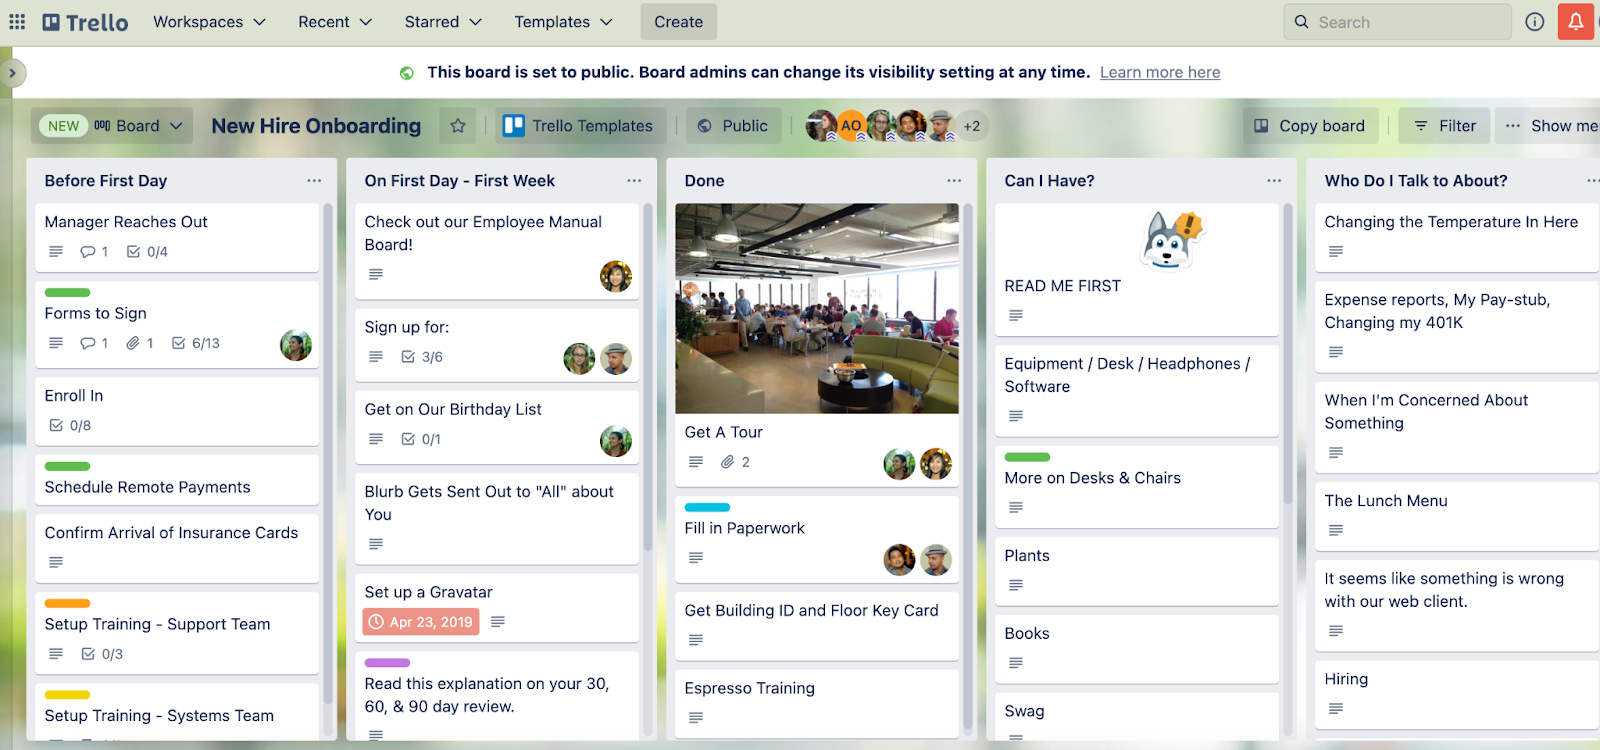 Screenshot of a New Hire Onboarding board template in Trello